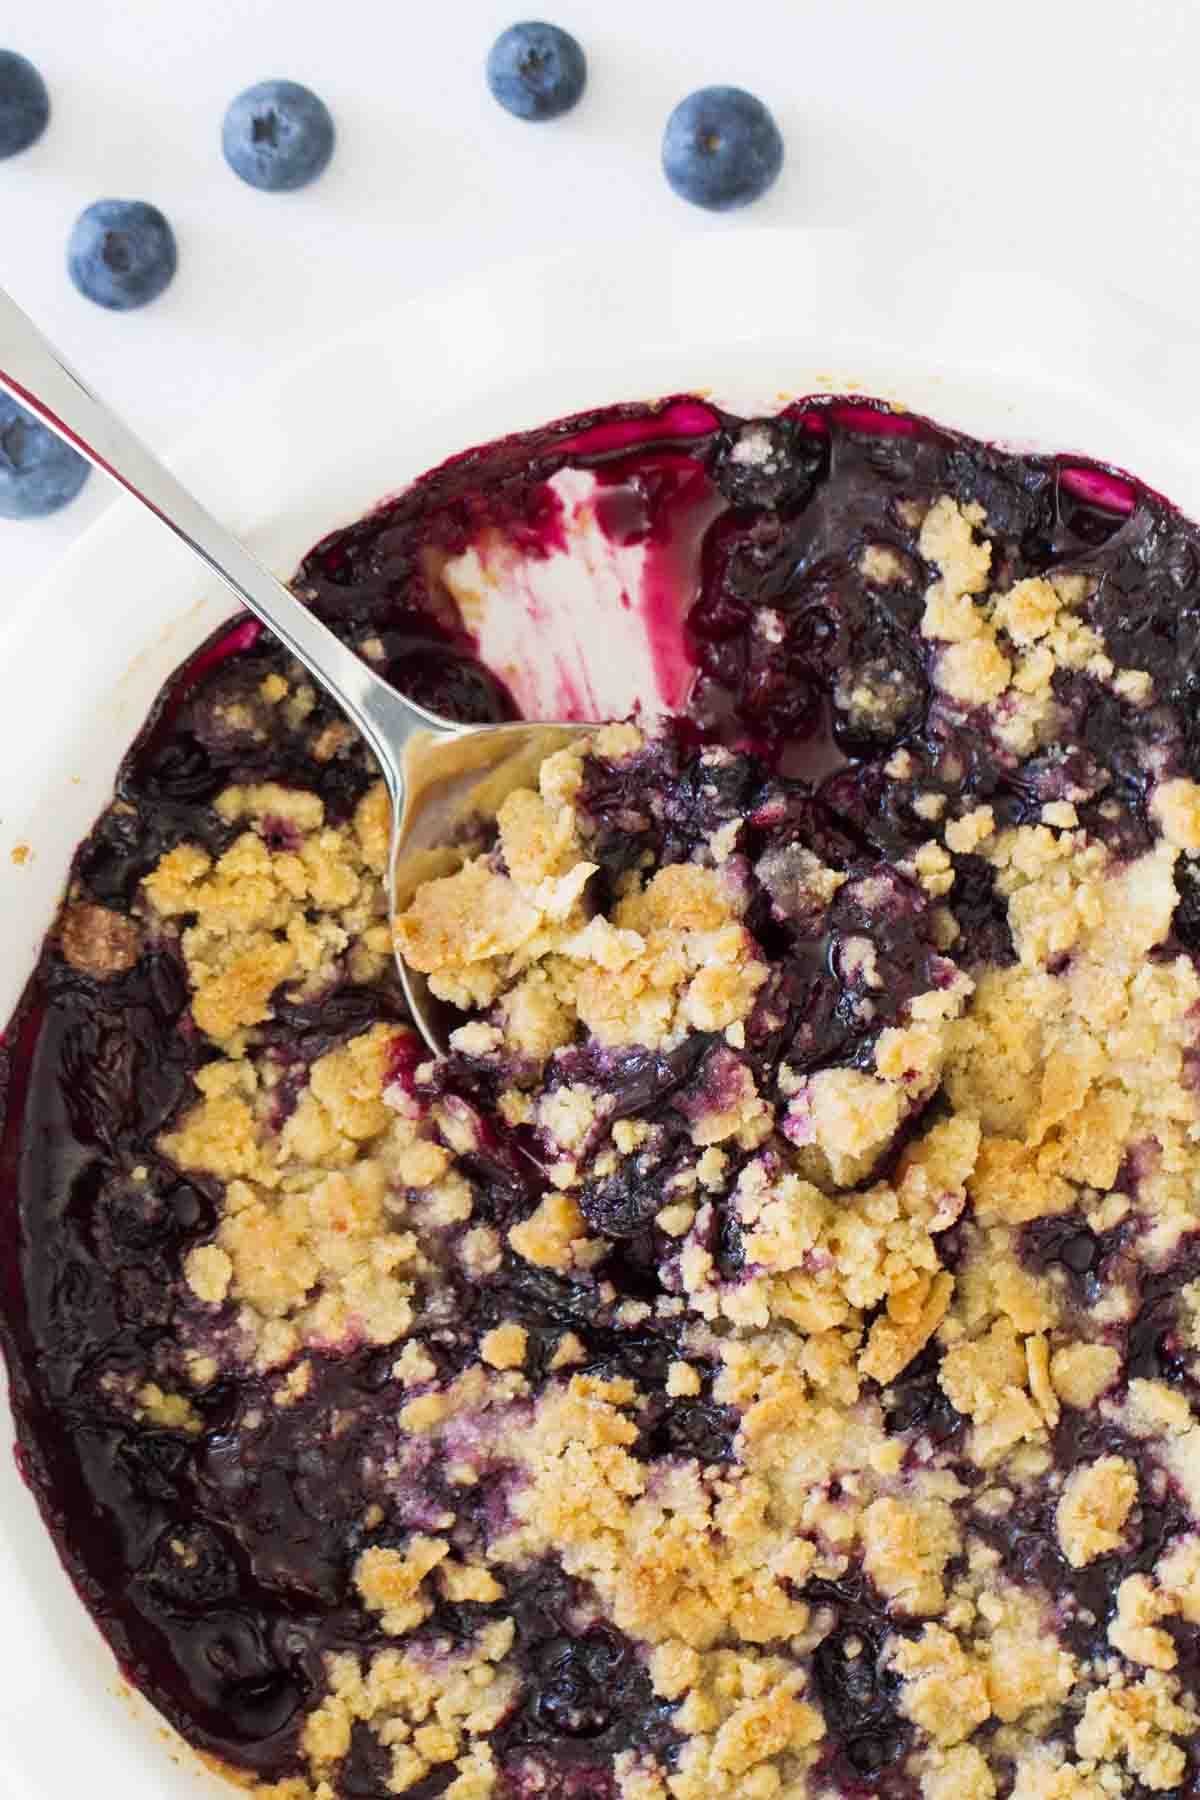 Dish of blueberry crisp with serving spoon